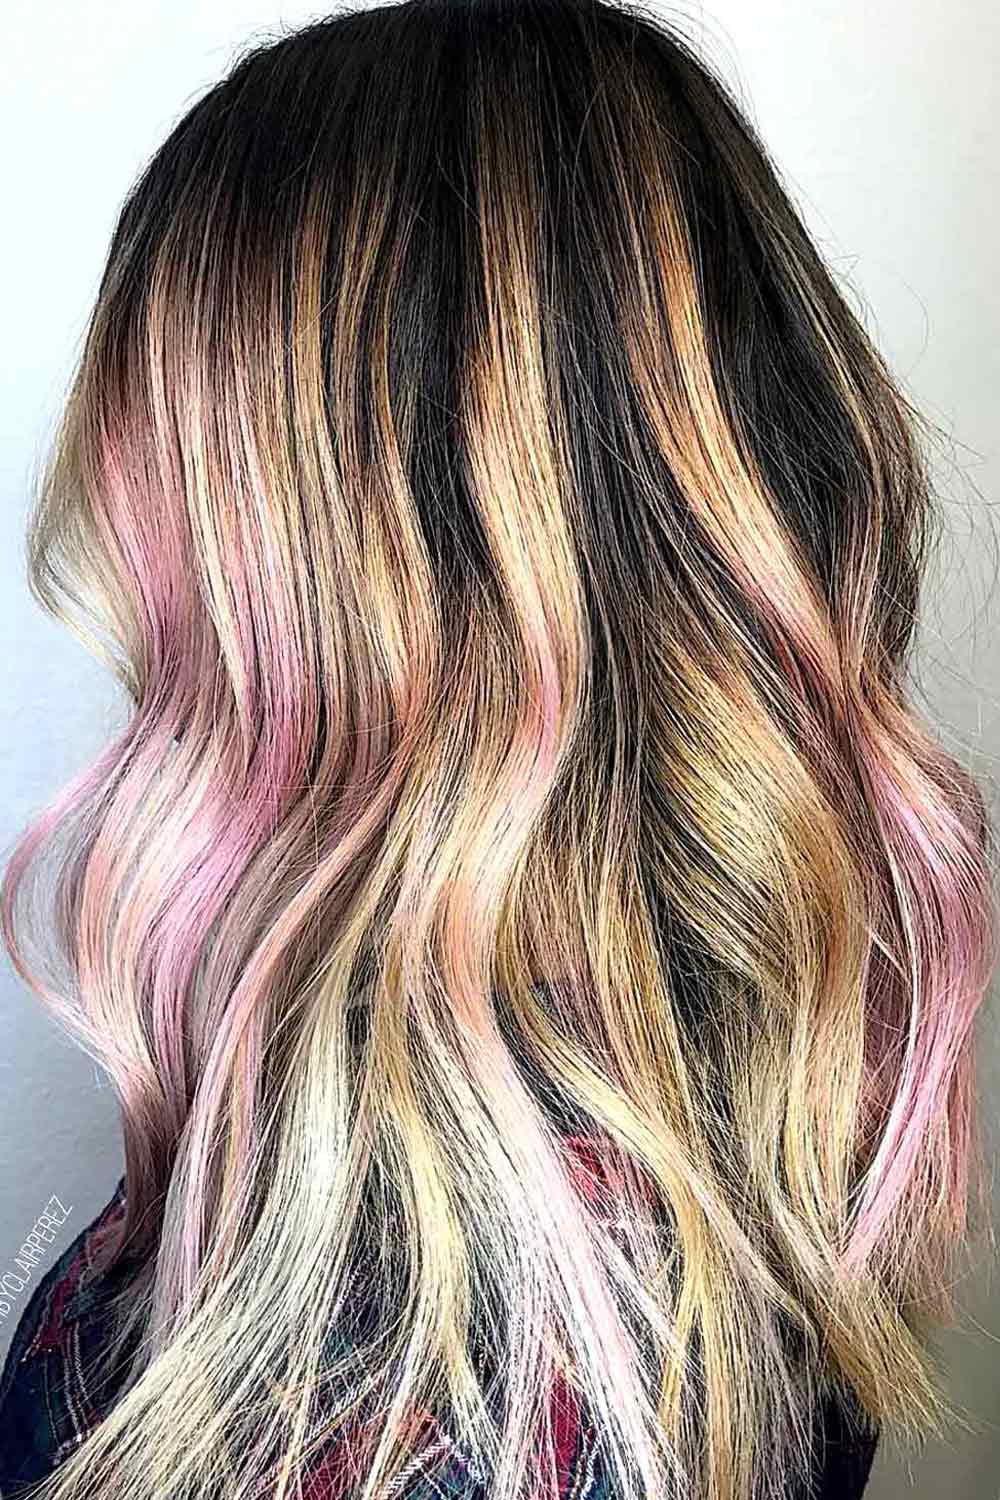 Pale Pink, Black, and Blonde Hair Ombre #blackandblondehair #blackhair #blondehair